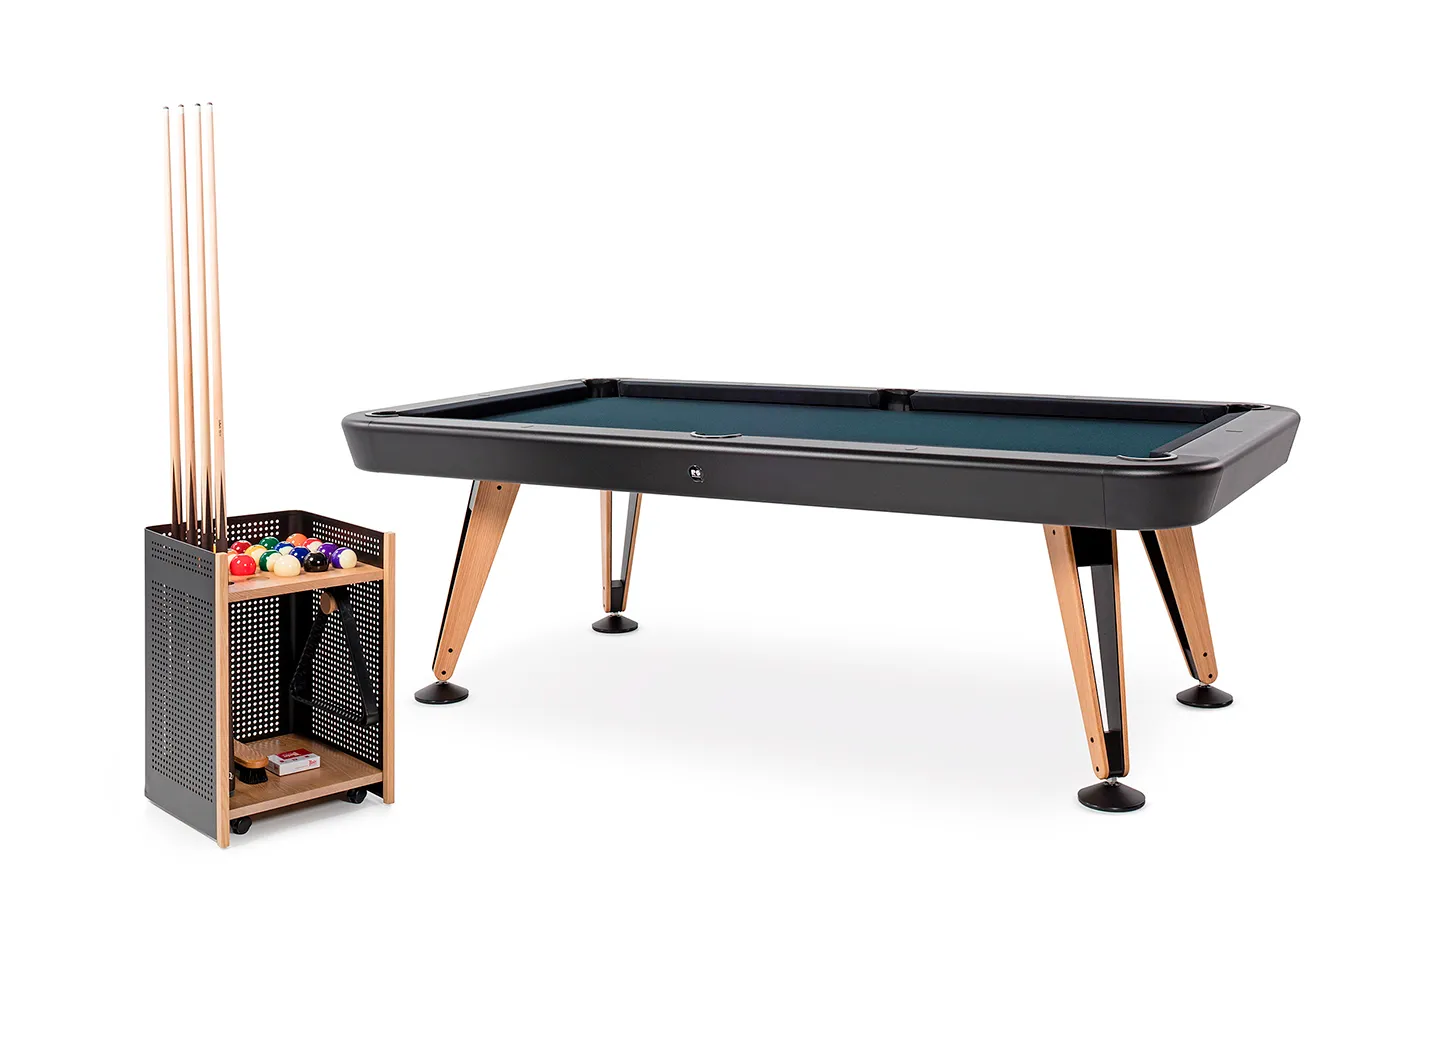 RS Barcelona Diagonal pool table for indoor and outdoor use